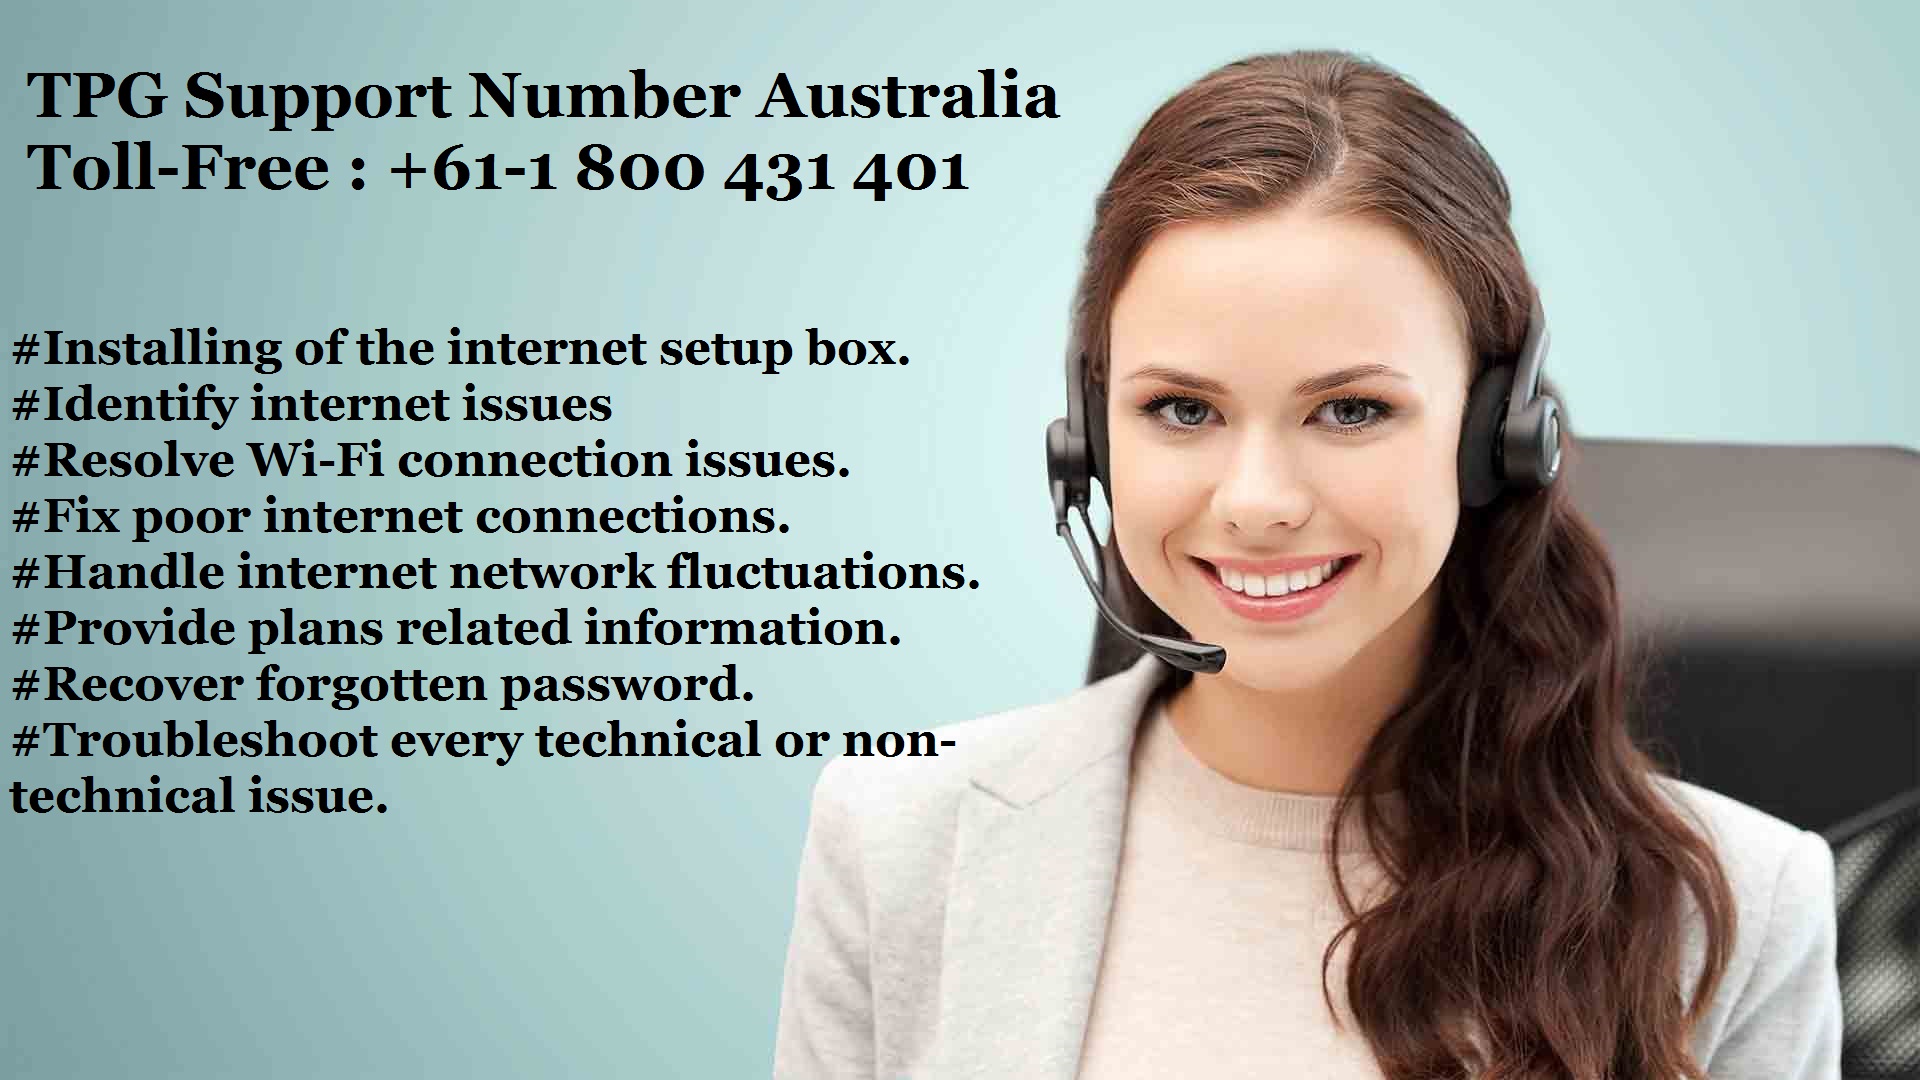 Article about TPG Phone Number 